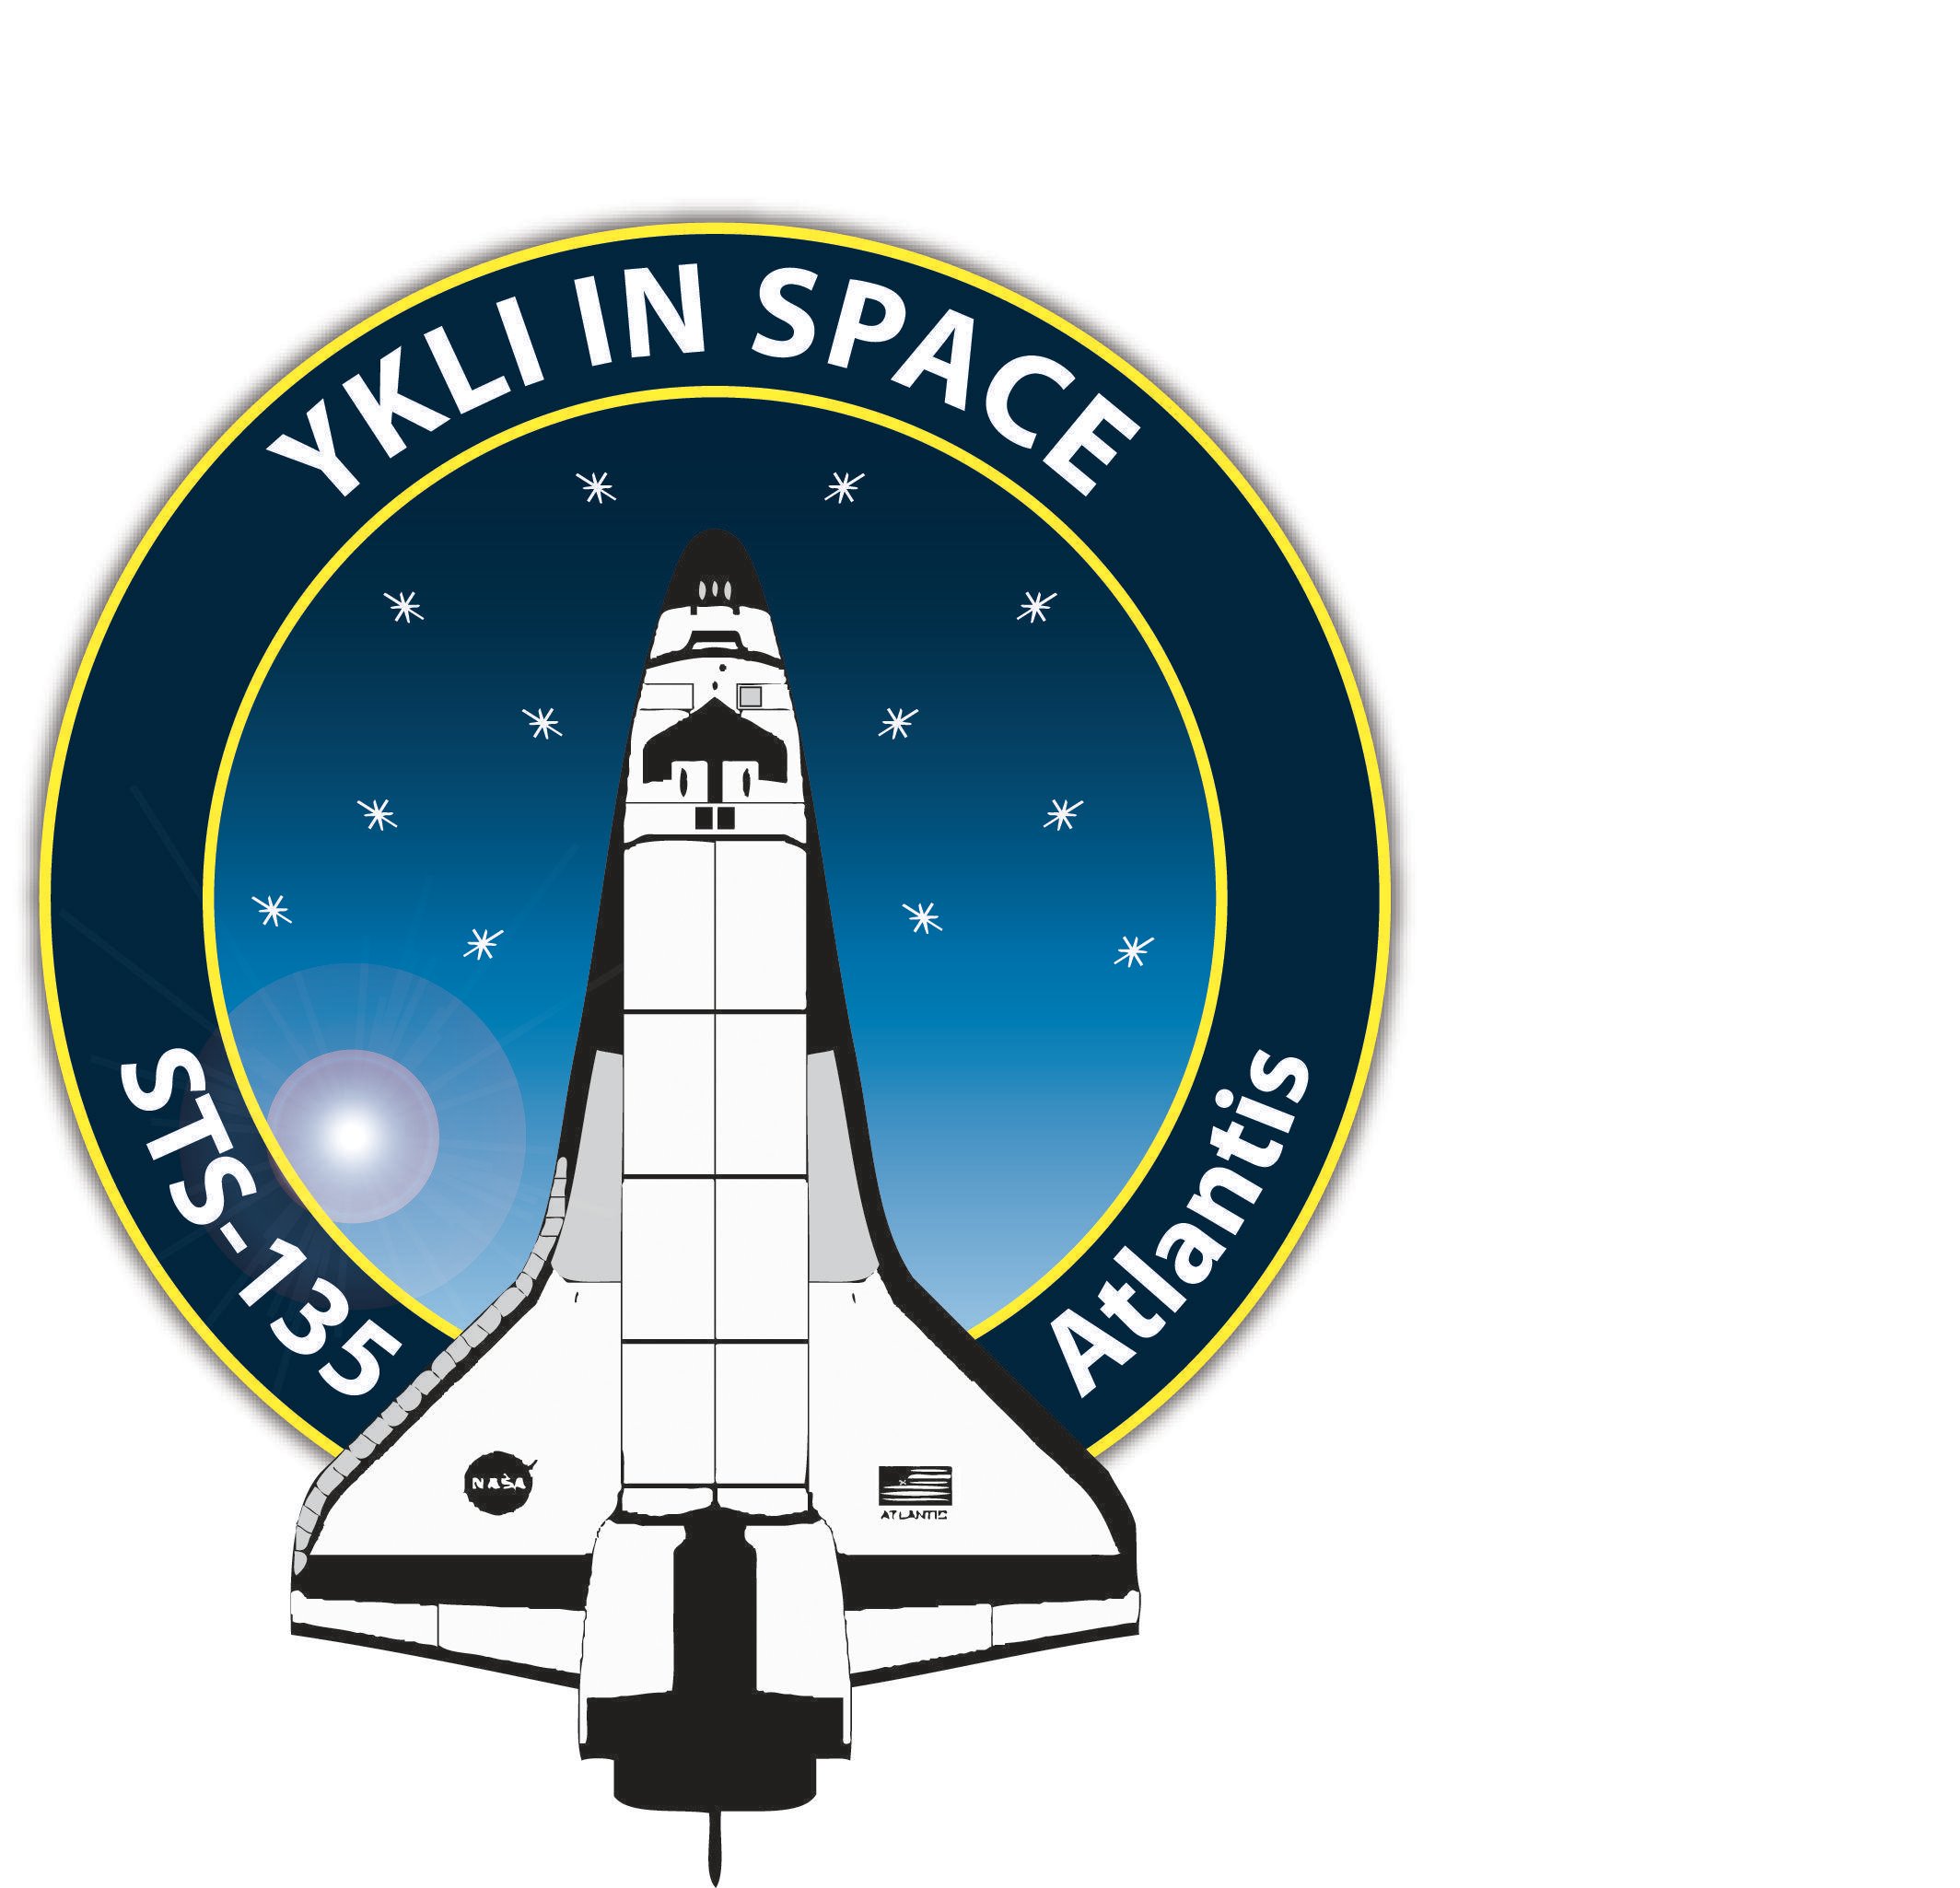 Space Shuttle Logo - Space Shuttle Patches. Space shuttle